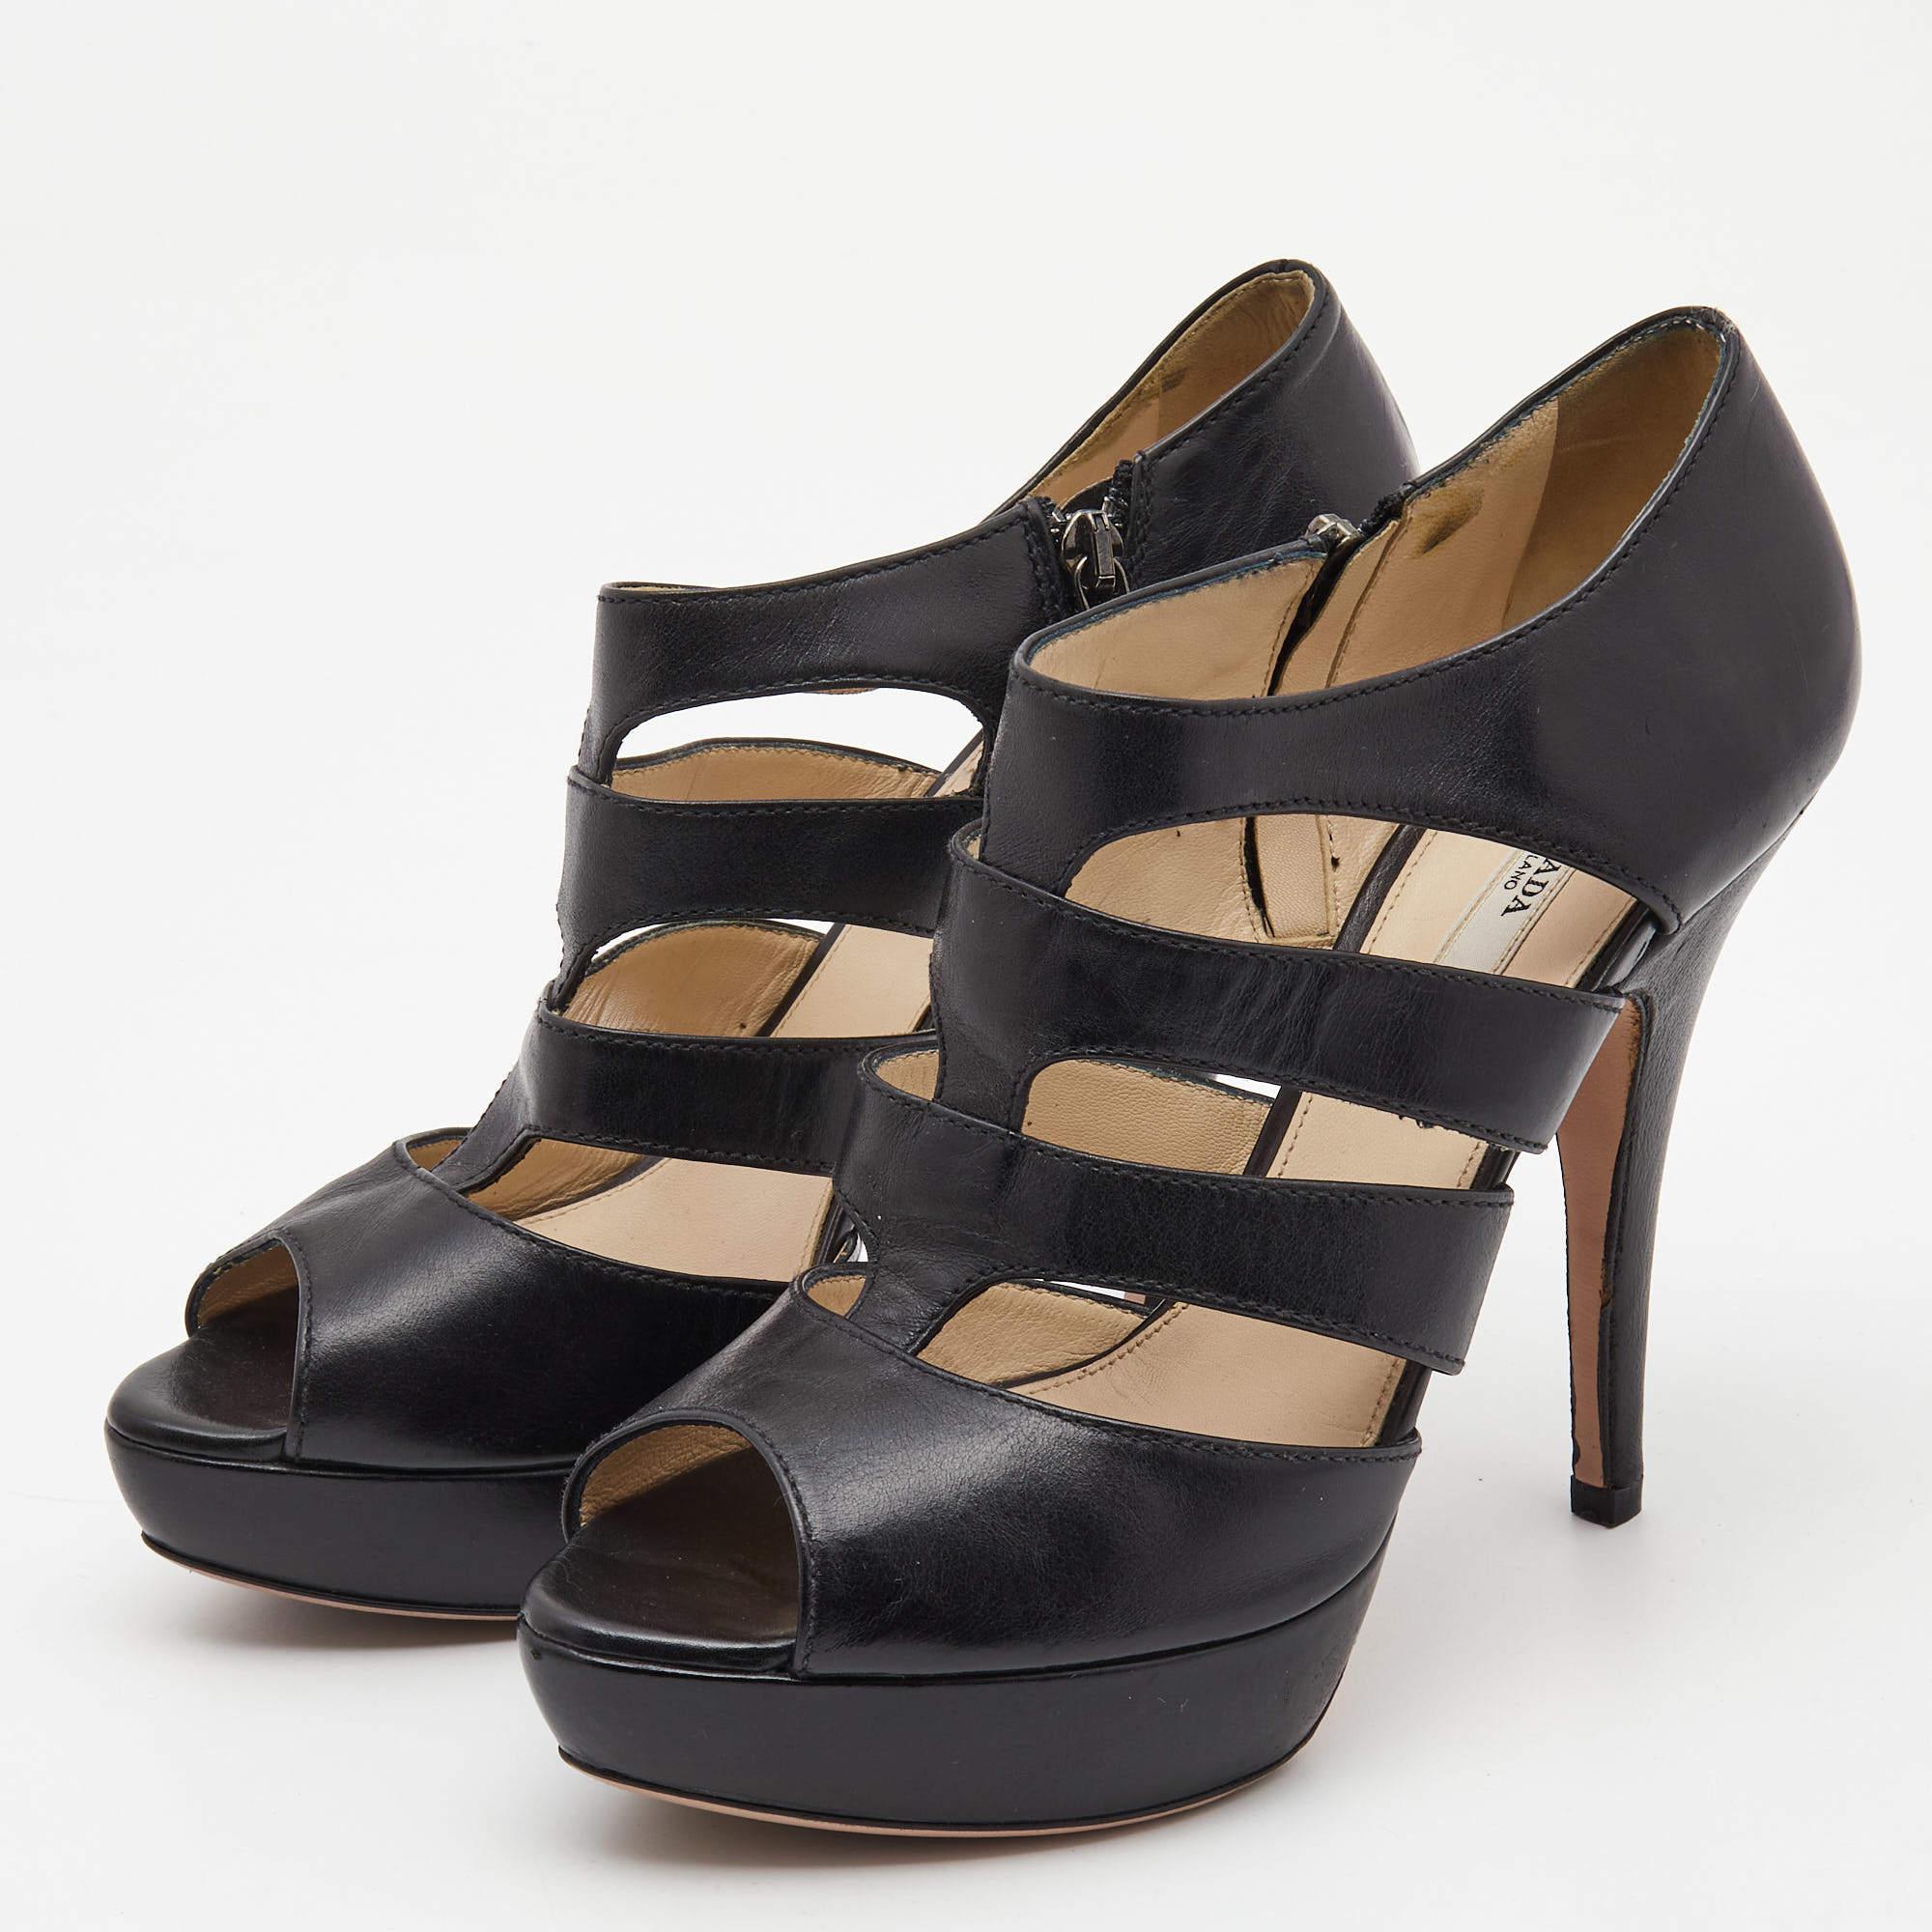 Prada Black Leather Strappy Sandals Size 39.5 For Sale 3